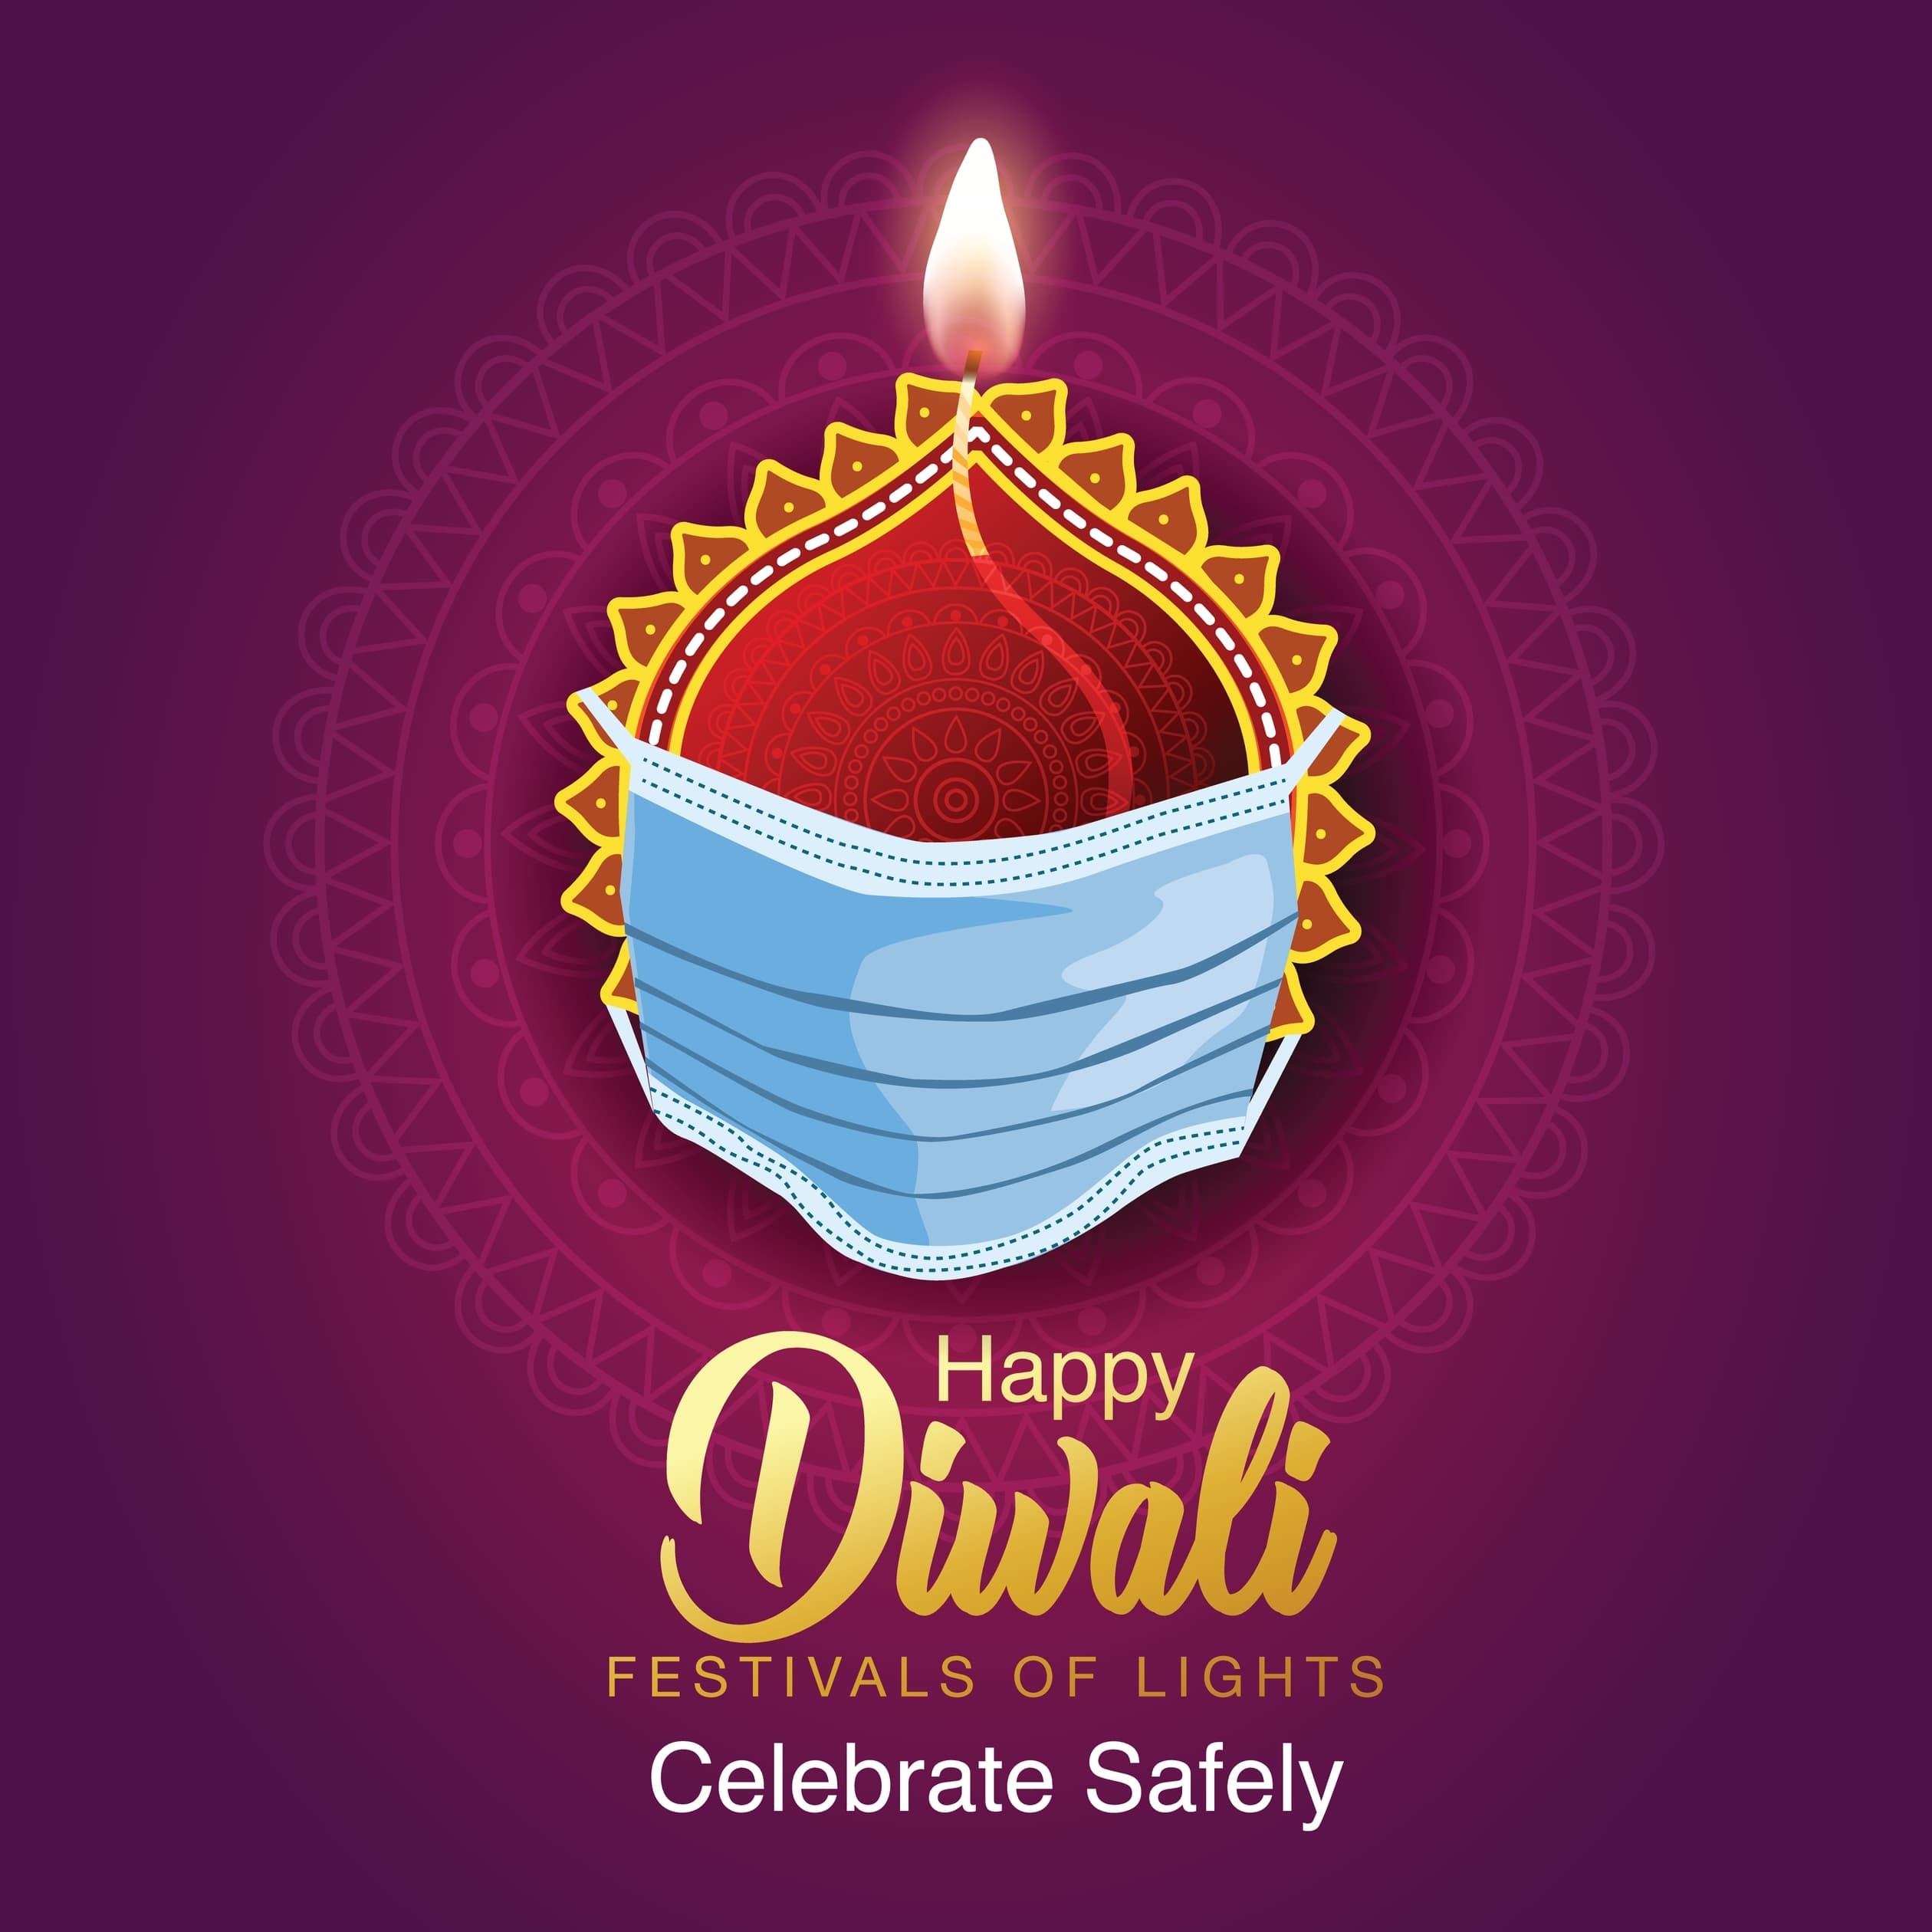 happy diwali images and wishes